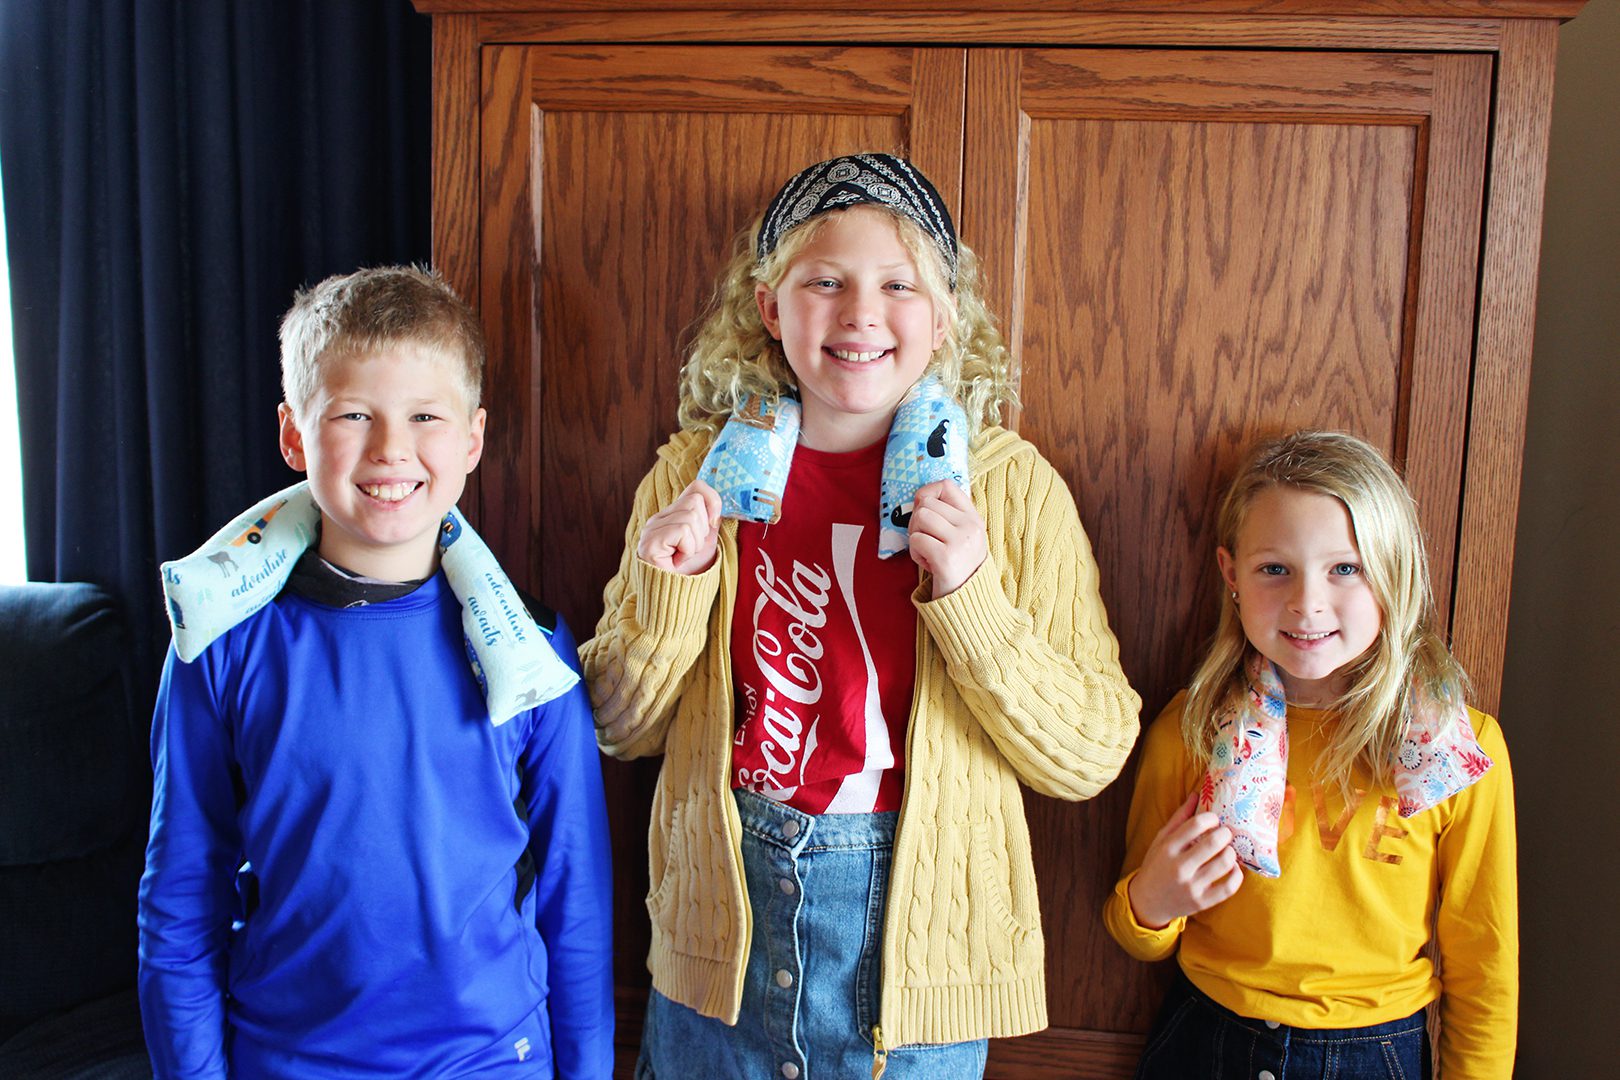 Three children with microwavable rice packs around their shoulders.